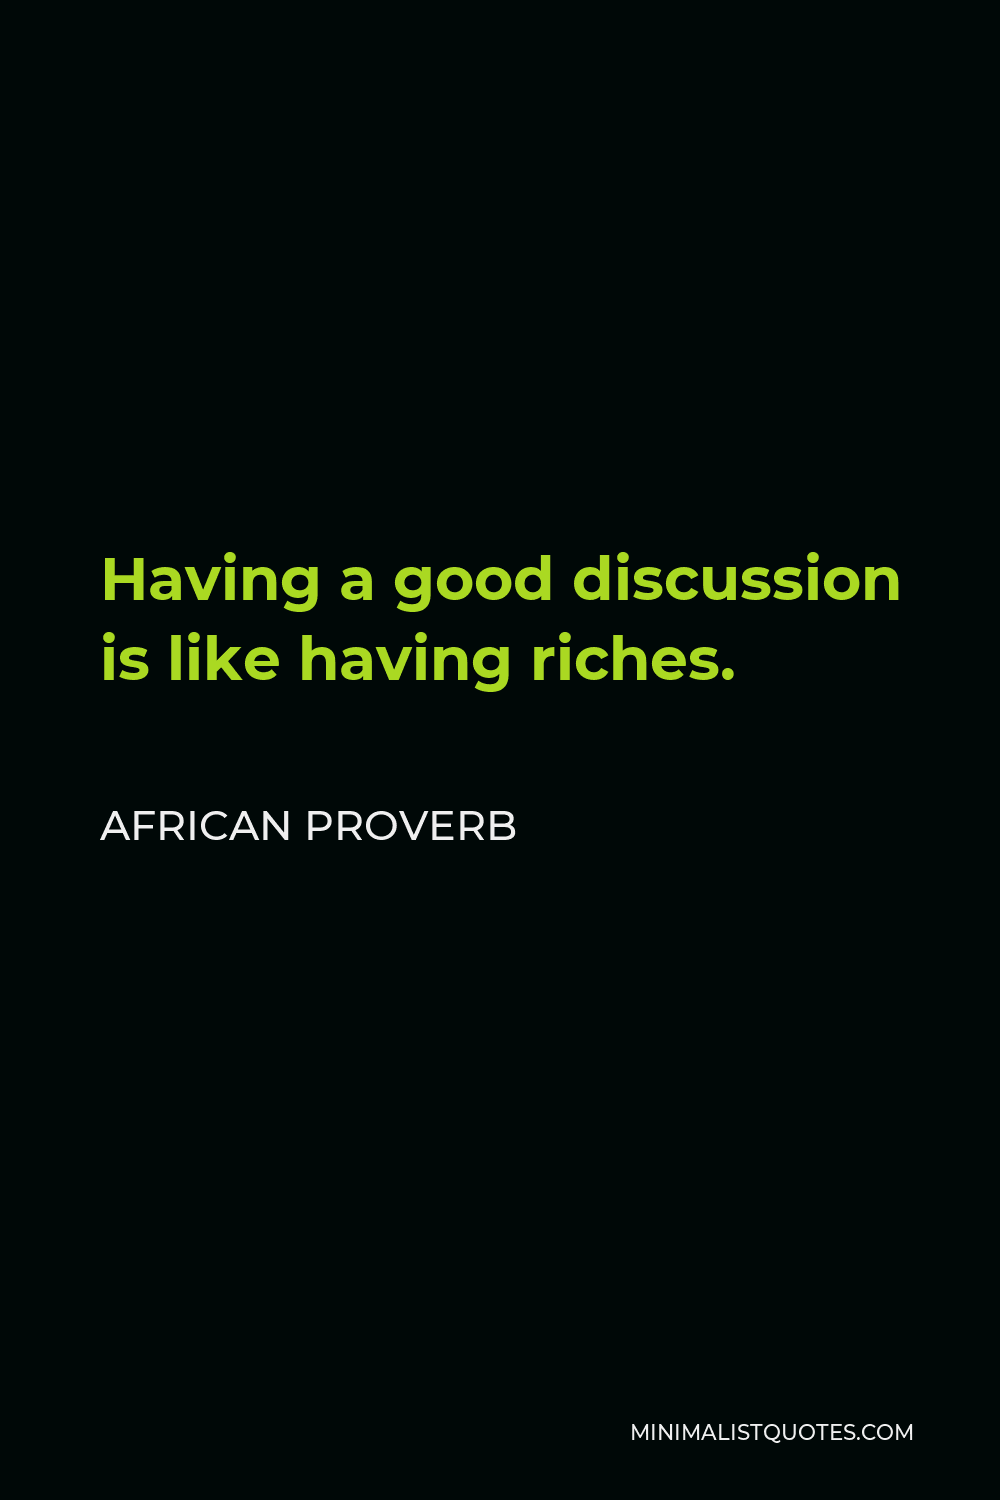 African Proverb Quote - Having a good discussion is like having riches.